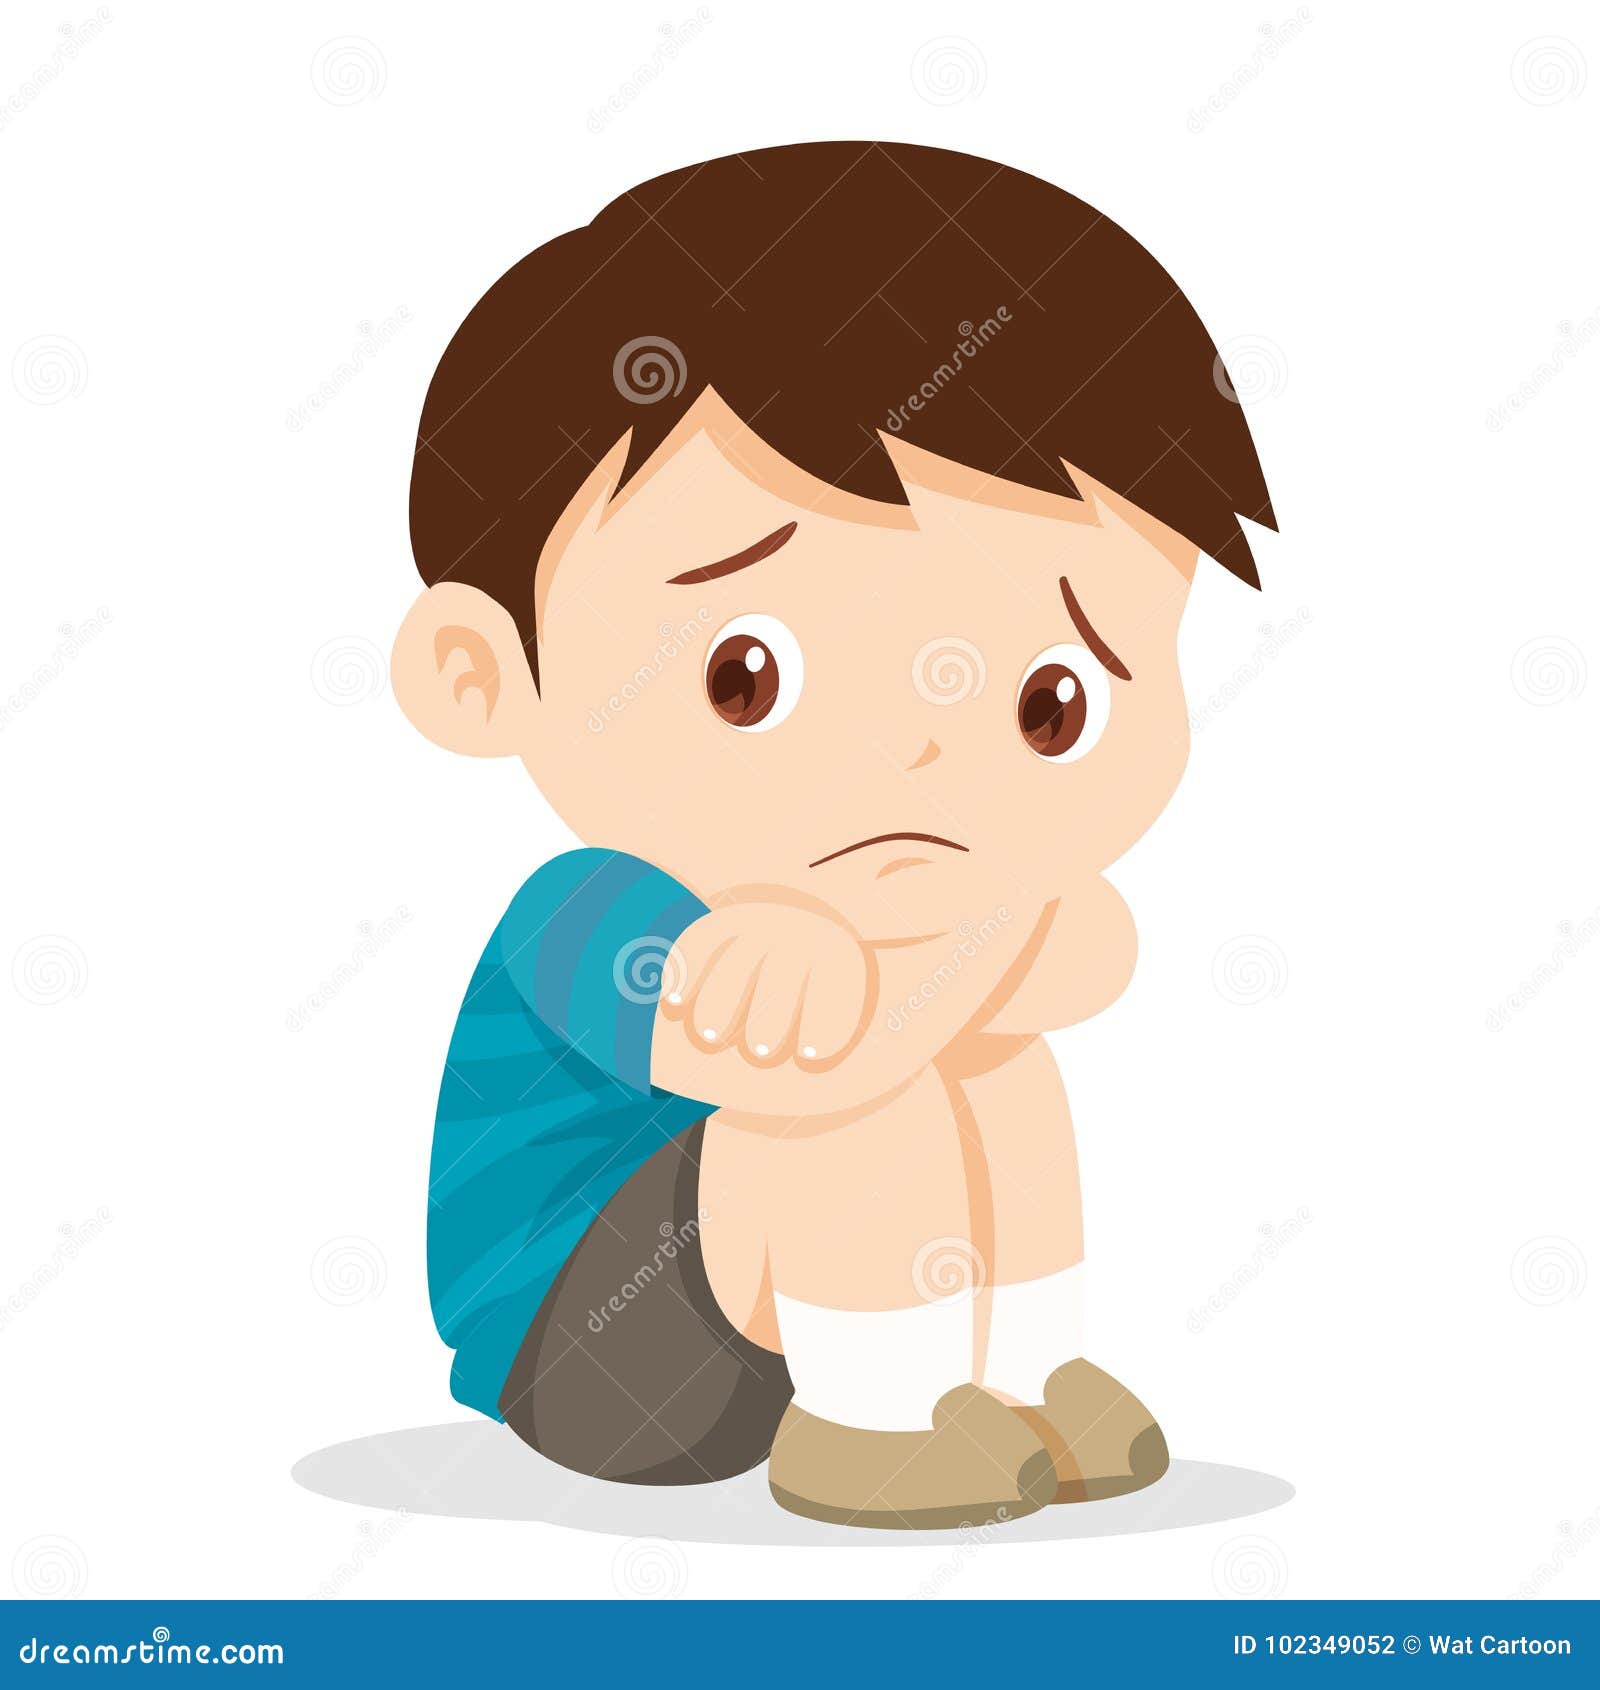 Sad Cartoons, Illustrations & Vector Stock Images - 172506 Pictures to